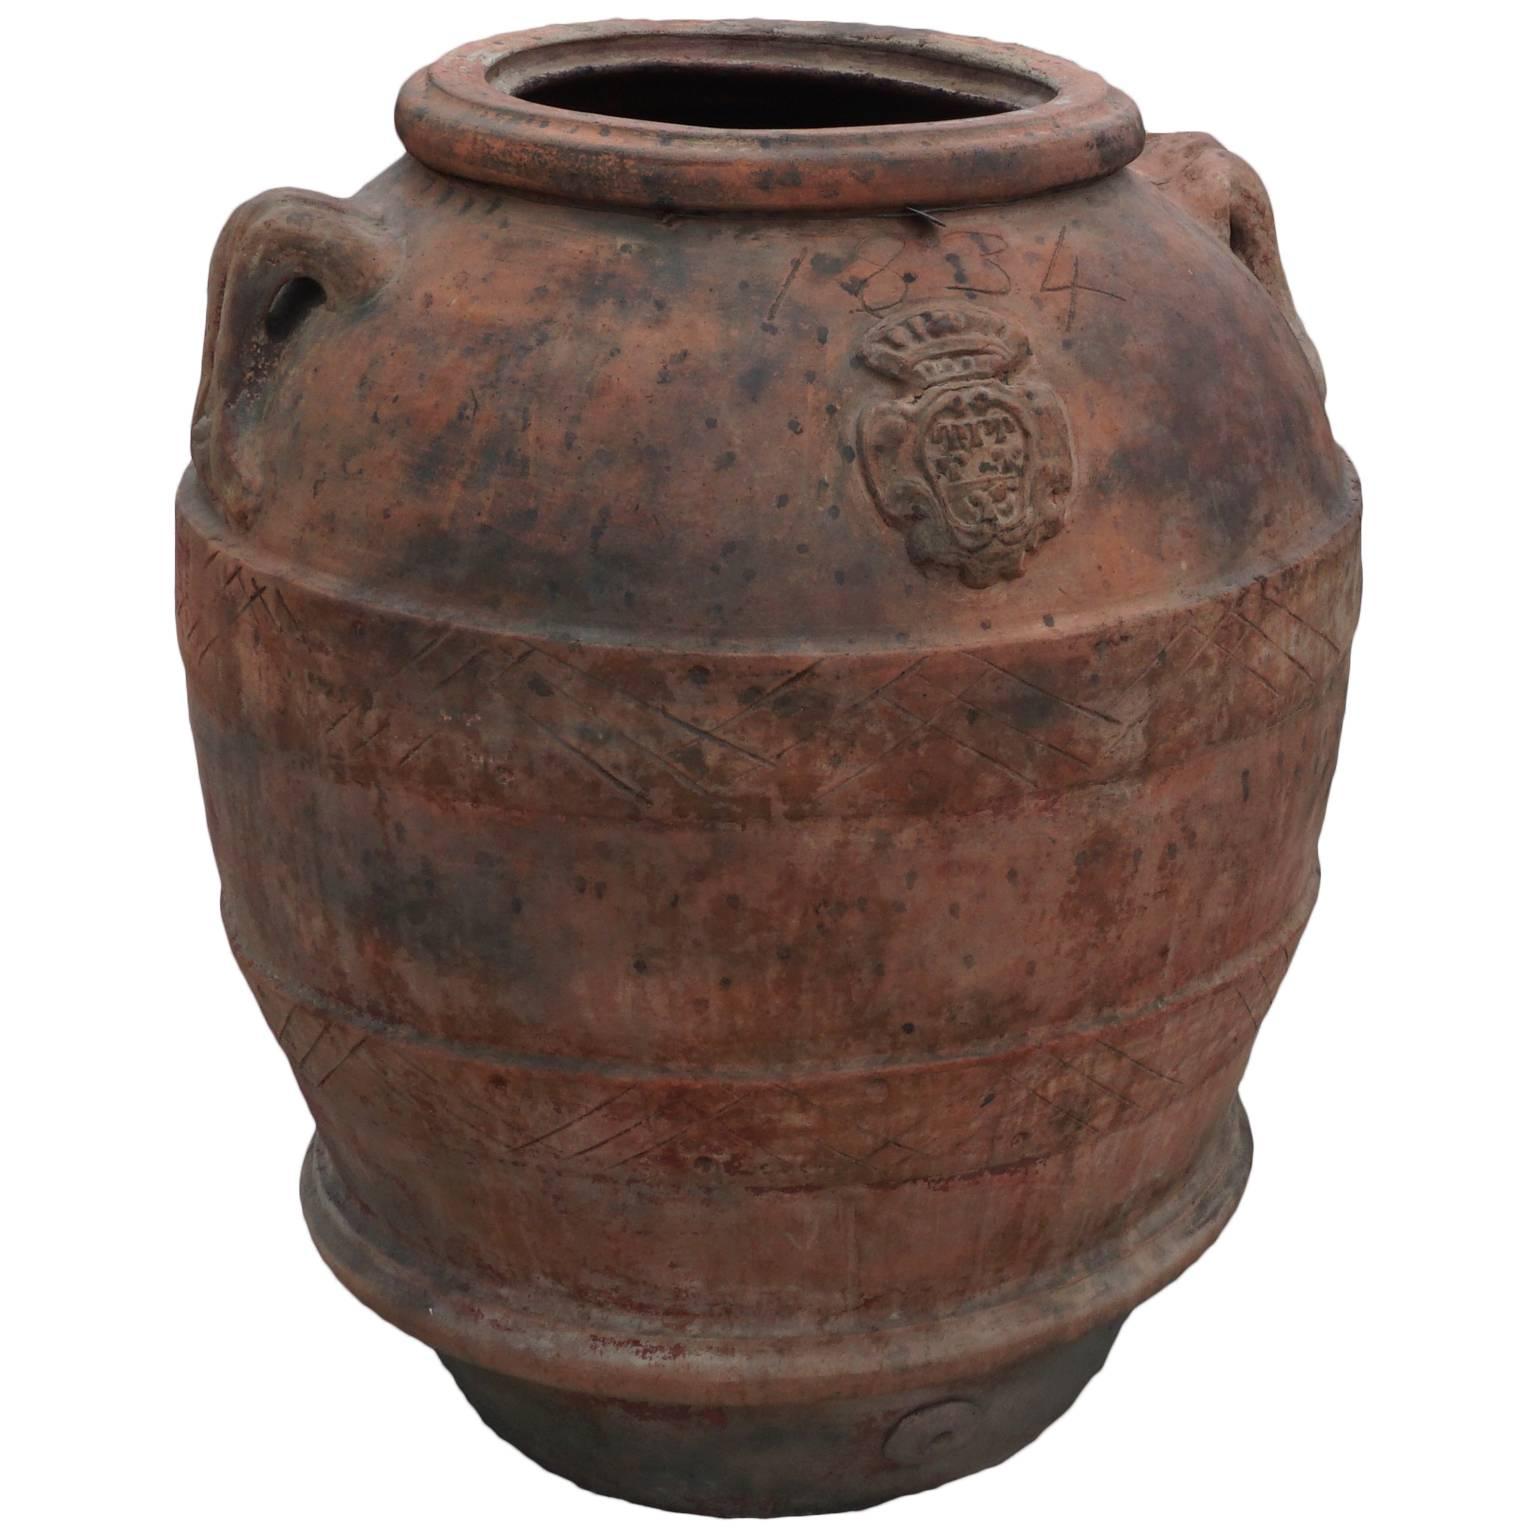 Very large antique Tuscan terra cotta planters which were used for storage of olives and grapes. Lateral handles and shields adorn these massive garden urns. Decorative bands and rolled rim decoration, made of Tuscan clay.